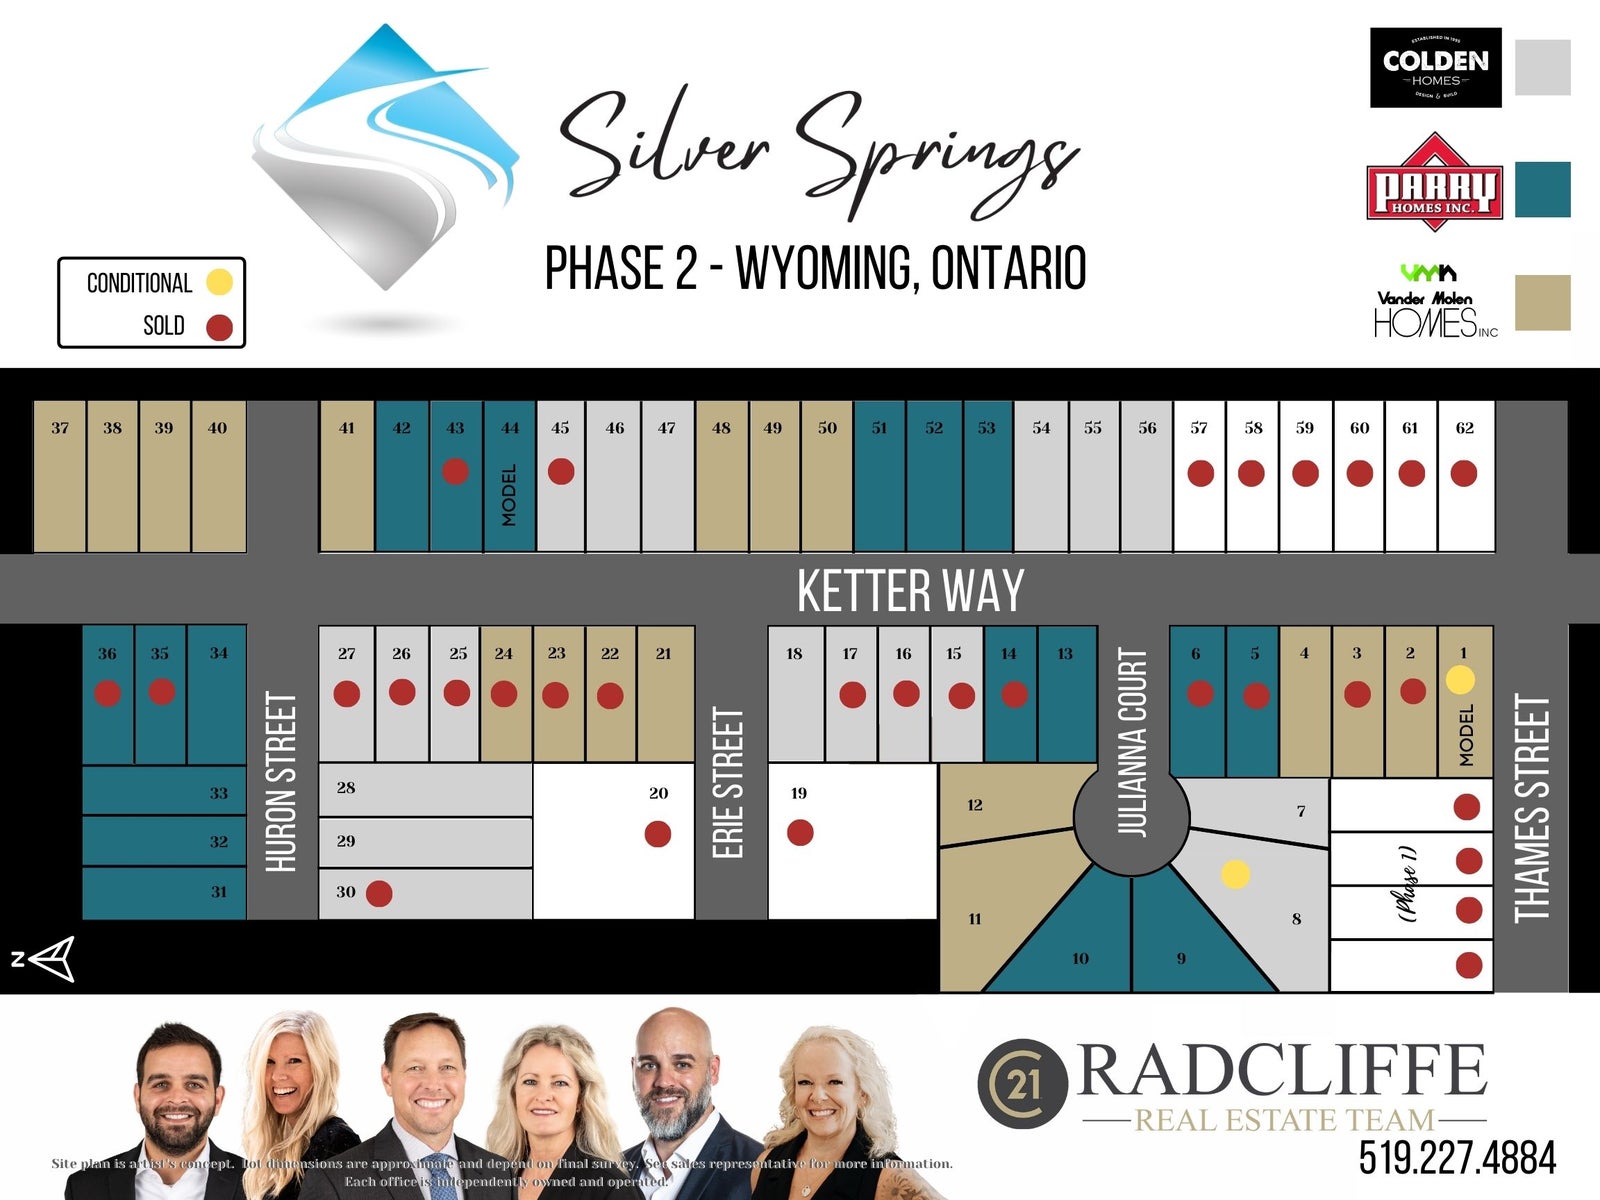 Silver Springs Wyoming - Phase 2, Radcliffe Real Estate